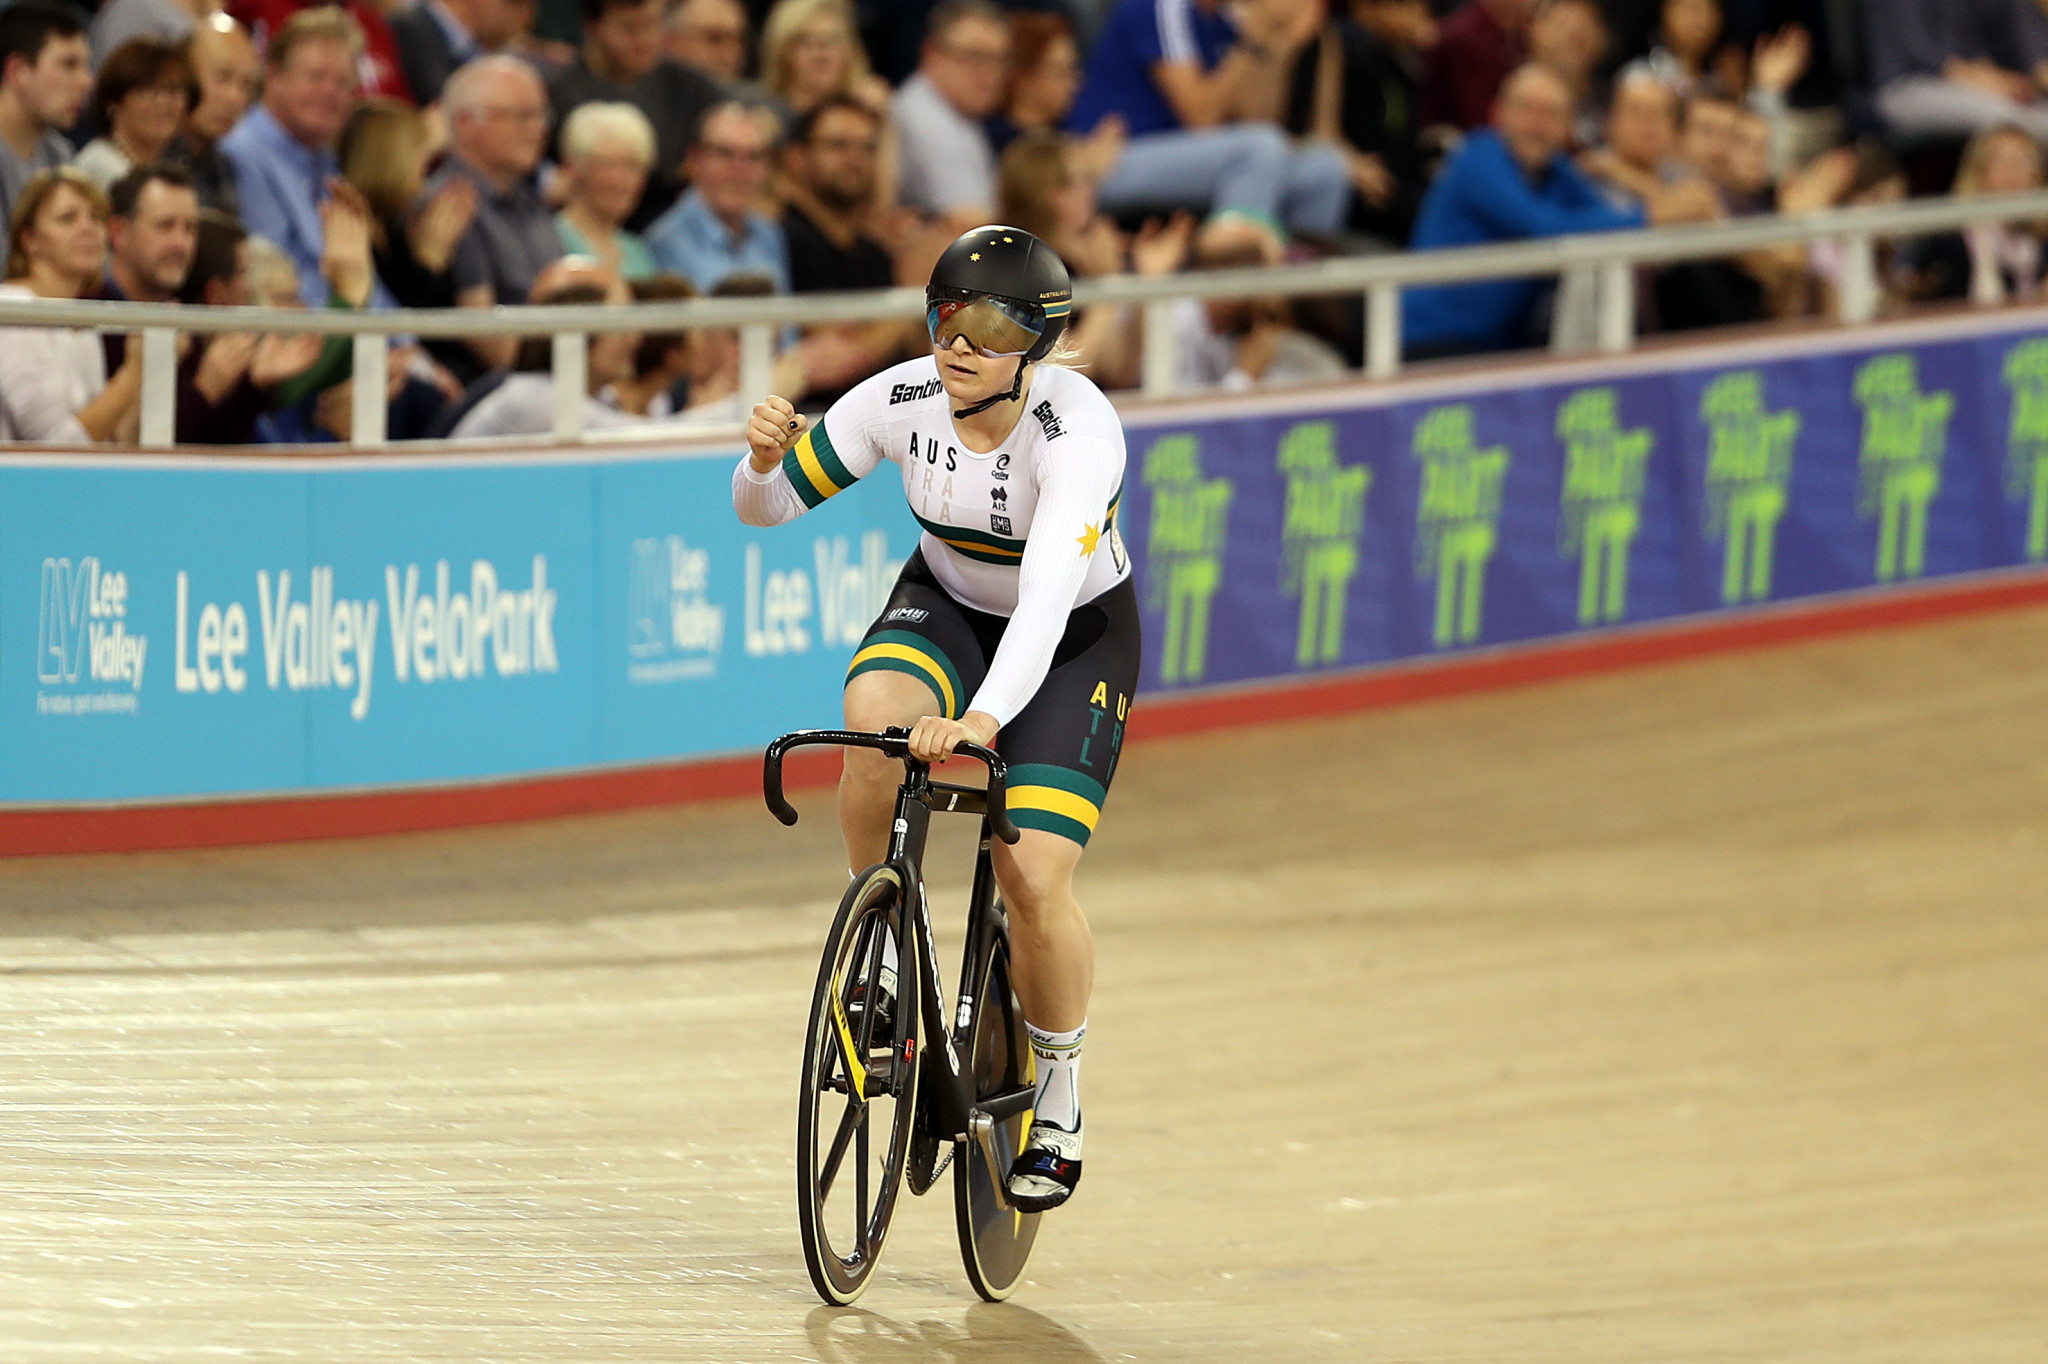 Stephanie Morton won the women's individual sprint event ©Getty Images